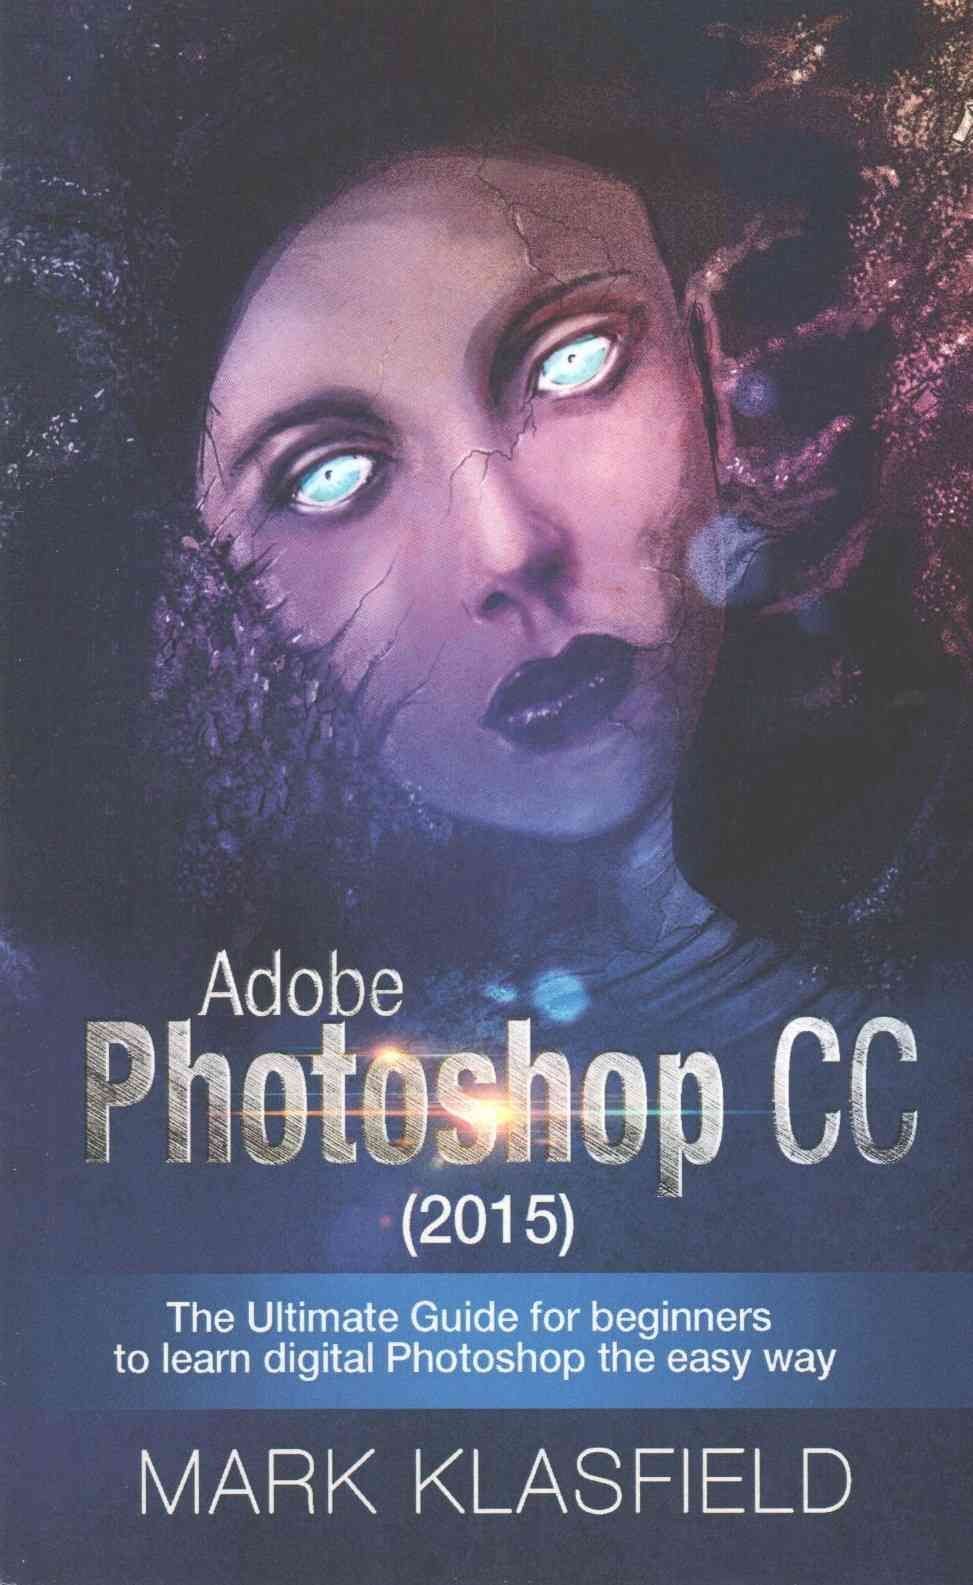 Buy Adobe Photoshop Cc 15 By Mark Klassfield With Free Delivery Wordery Com